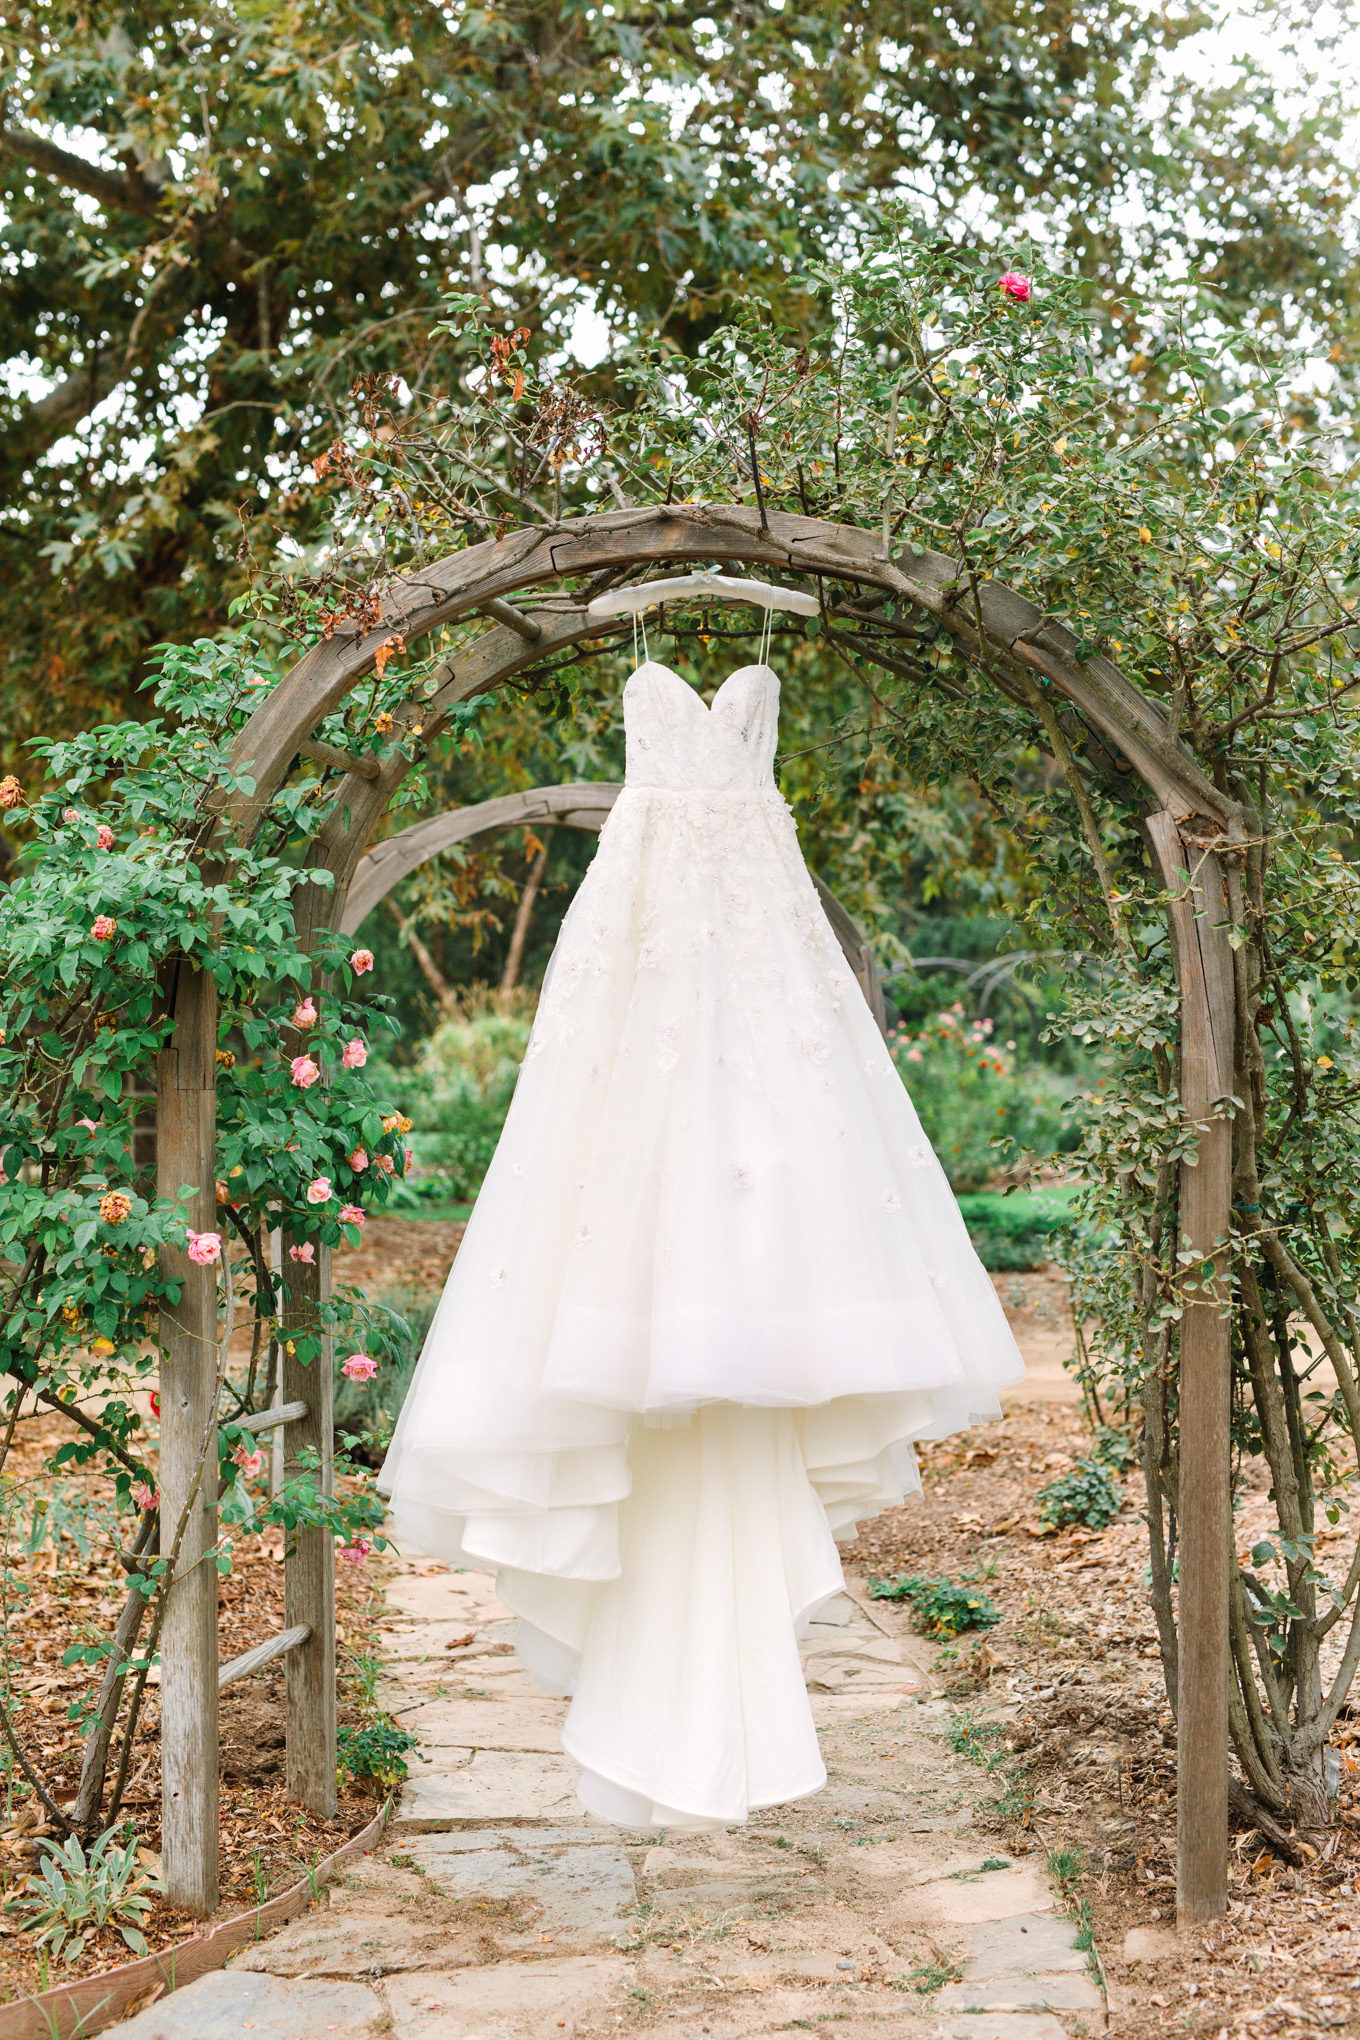 Wedding gown hanging at Descanso Gardens | Best Southern California Garden Wedding Venues | Colorful and elevated wedding photography for fun-loving couples | #gardenvenue #weddingvenue #socalweddingvenue #bouquetideas #uniquebouquet   Source: Mary Costa Photography | Los Angeles 